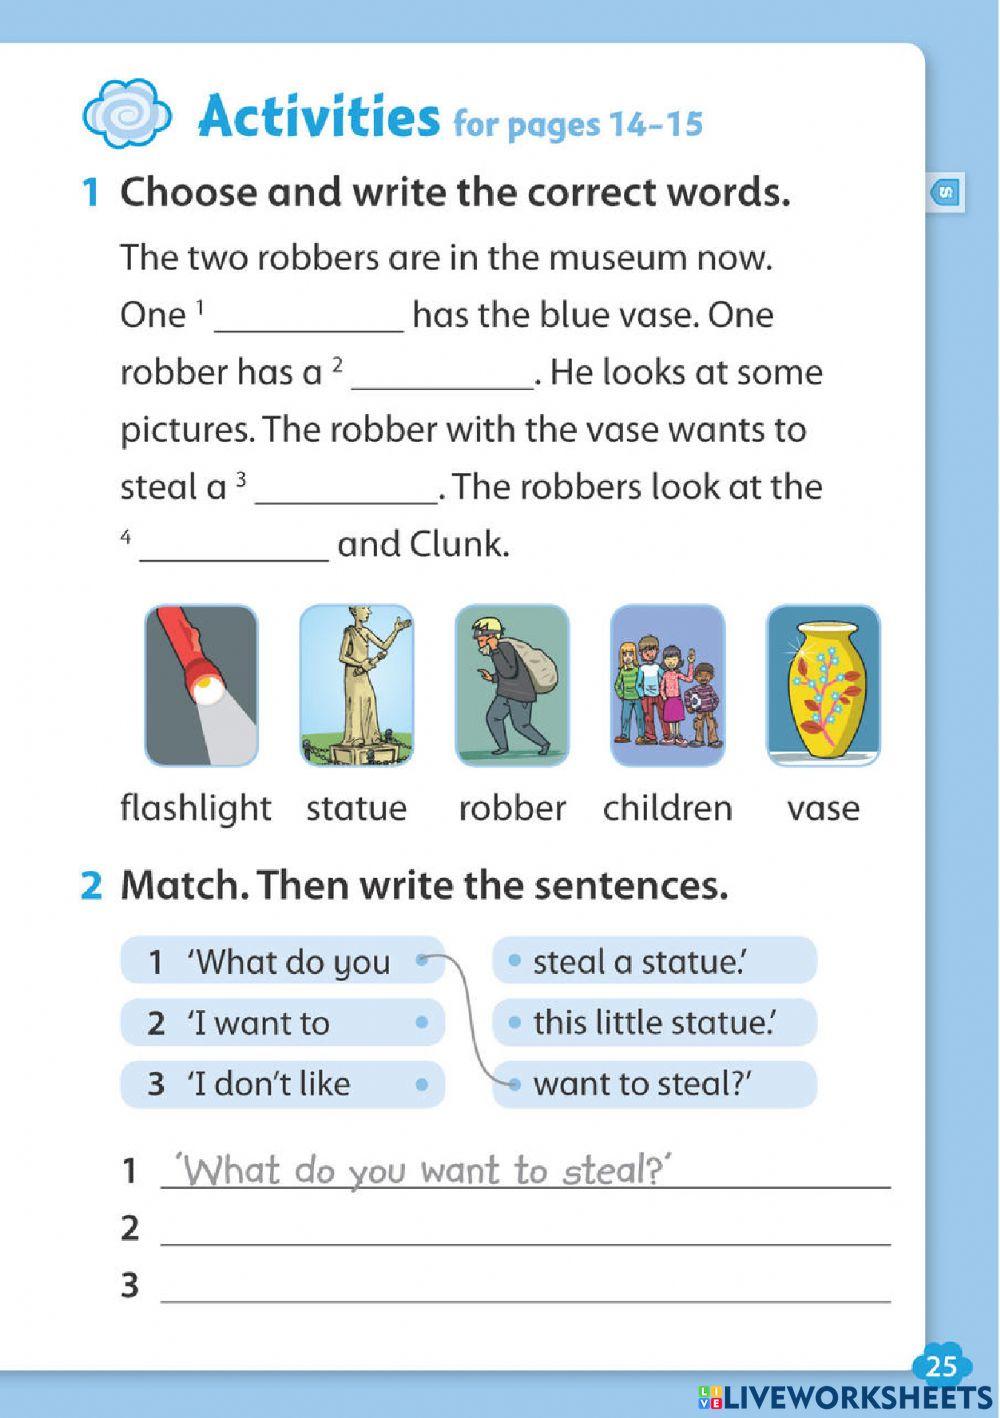 Robbers at the museum 2